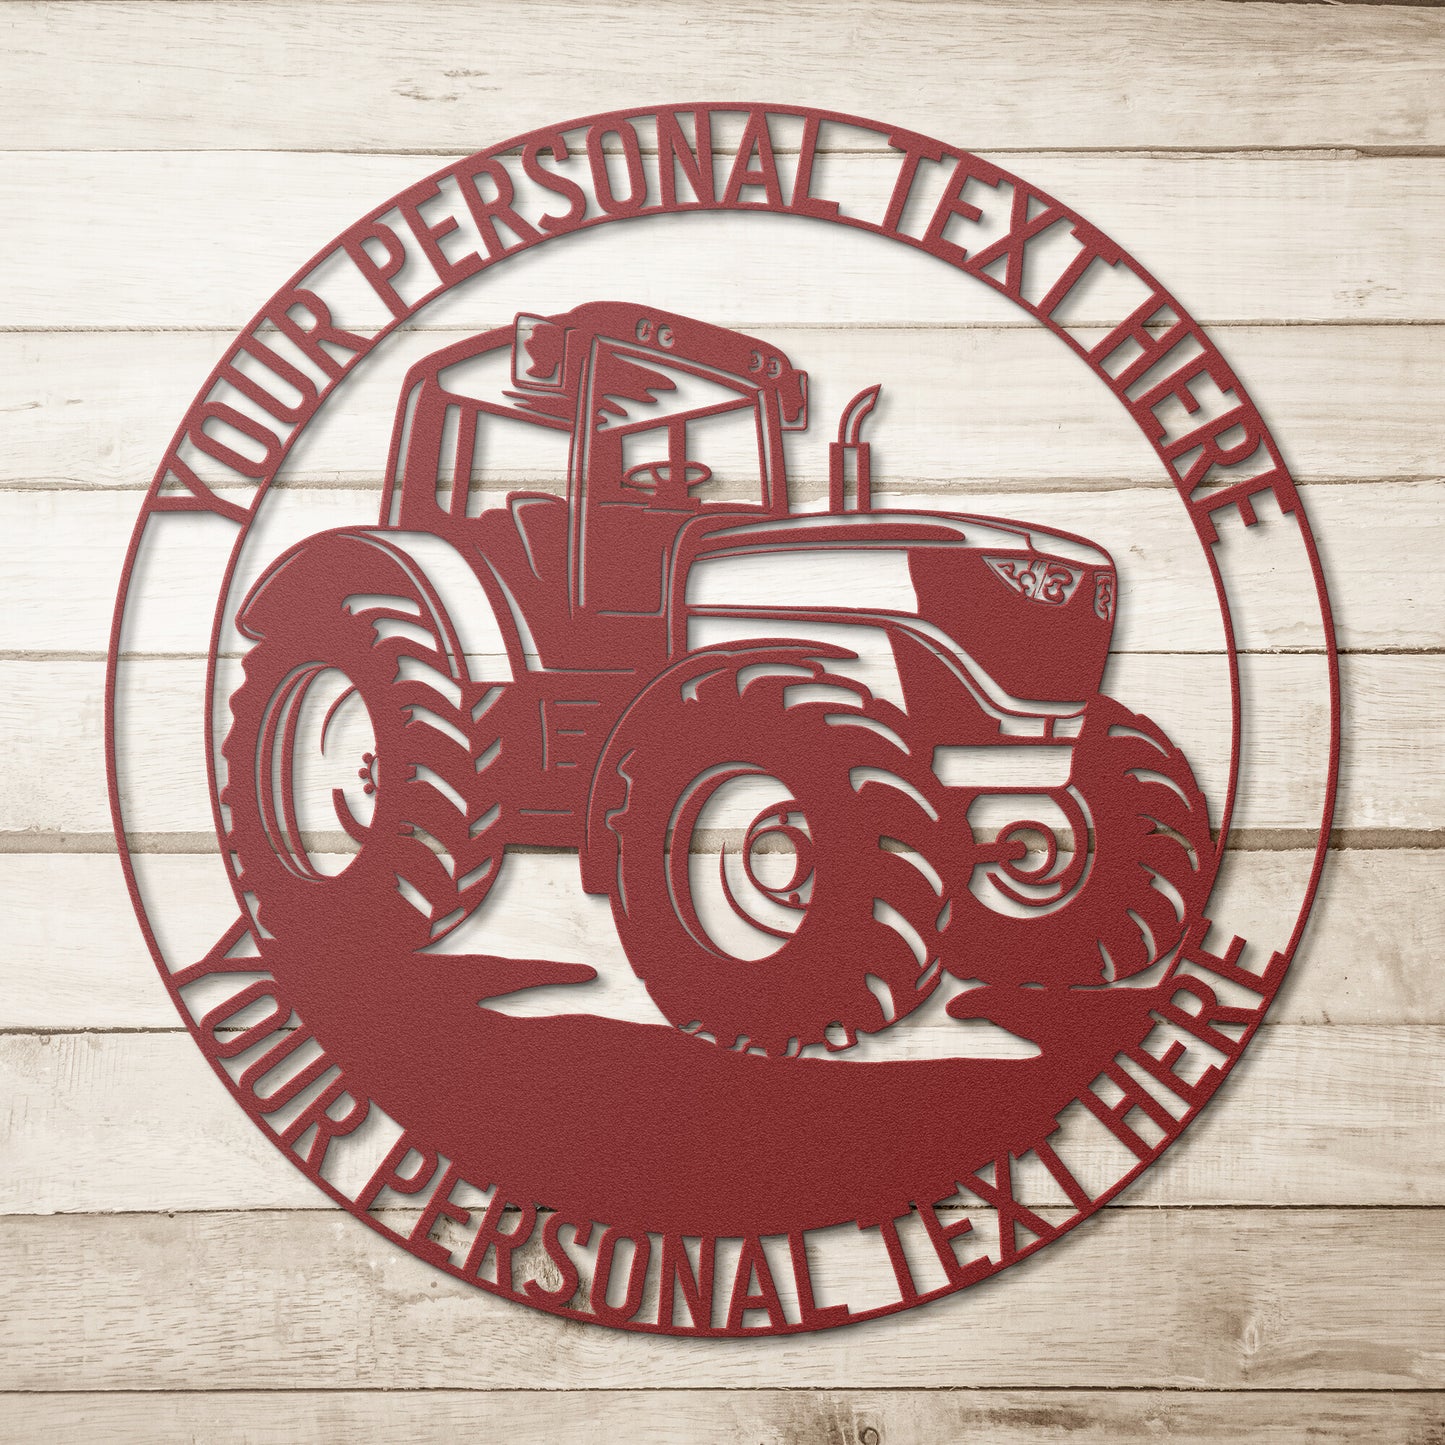 Personalized Tractor Name Metal Sign Gift, Custom Gift For Farmer, Heavy Machinery Operator Wall Decor, Farm Tractor Lover Wall Art Gifts